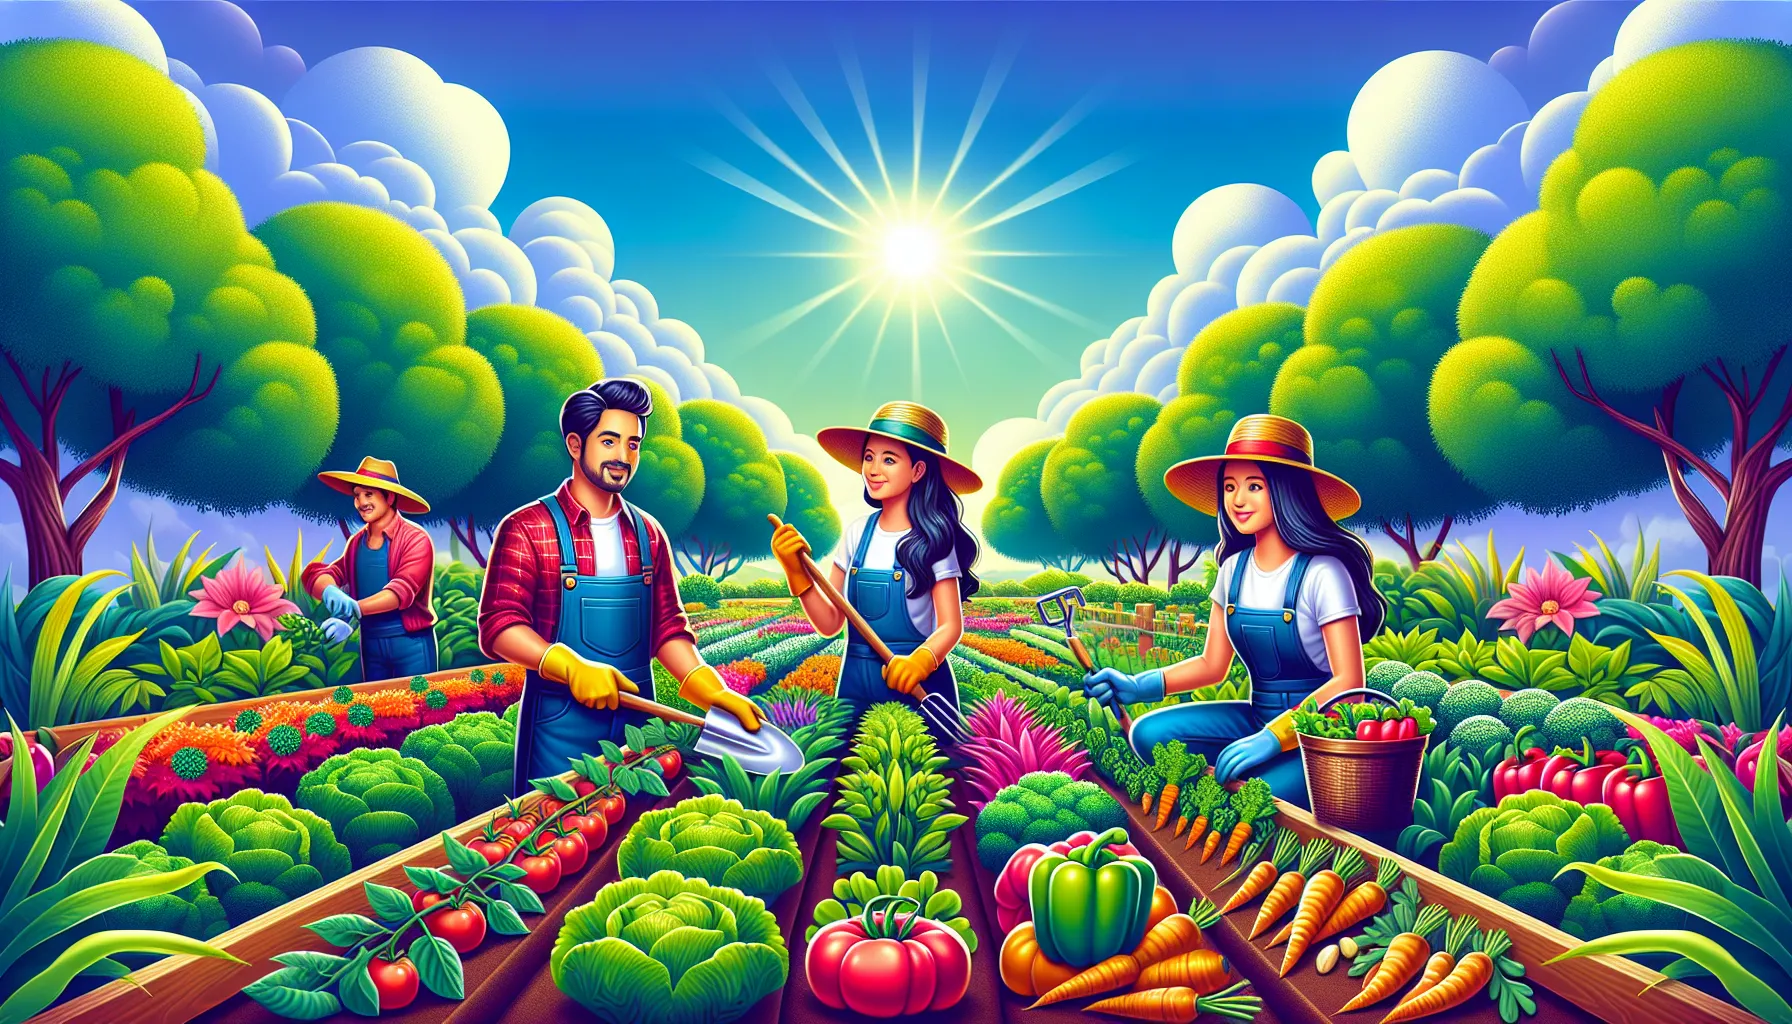 Colorful illustration of four people working in a vibrant veggie garden under a bright, sunny sky.